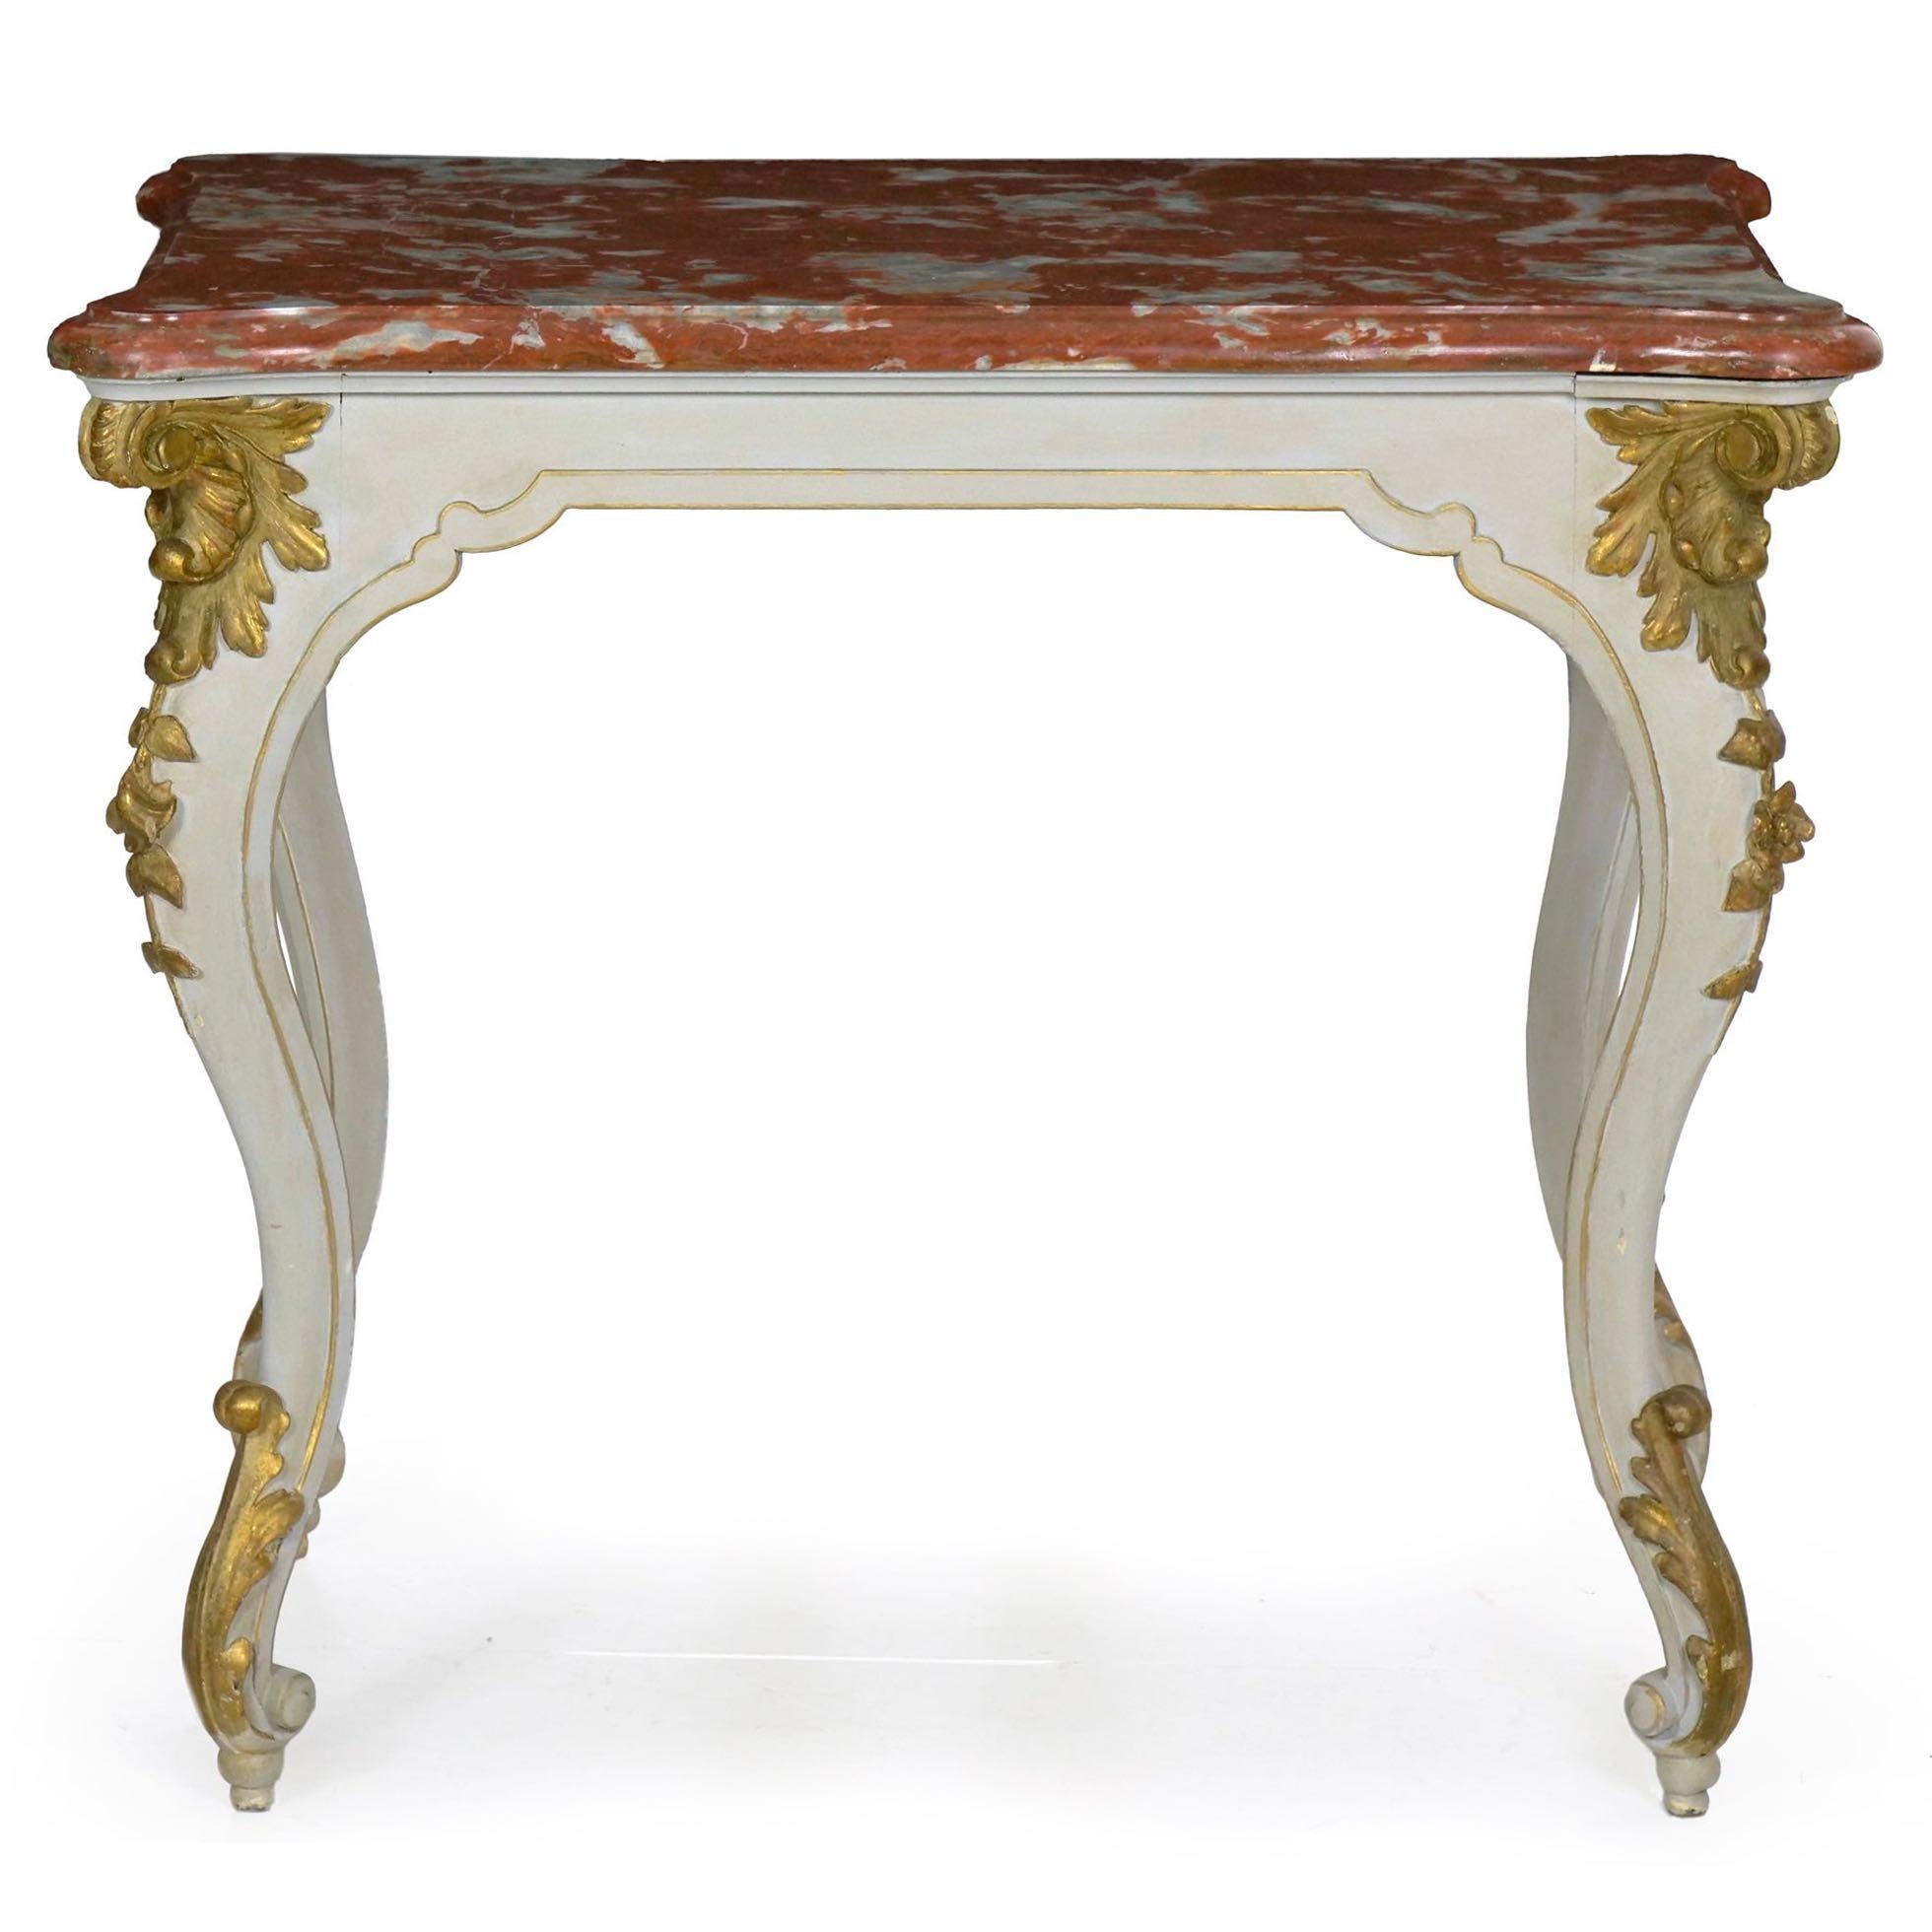 19th Century Italian Rococo Painted Antique Accent Console Table in Venetian Taste